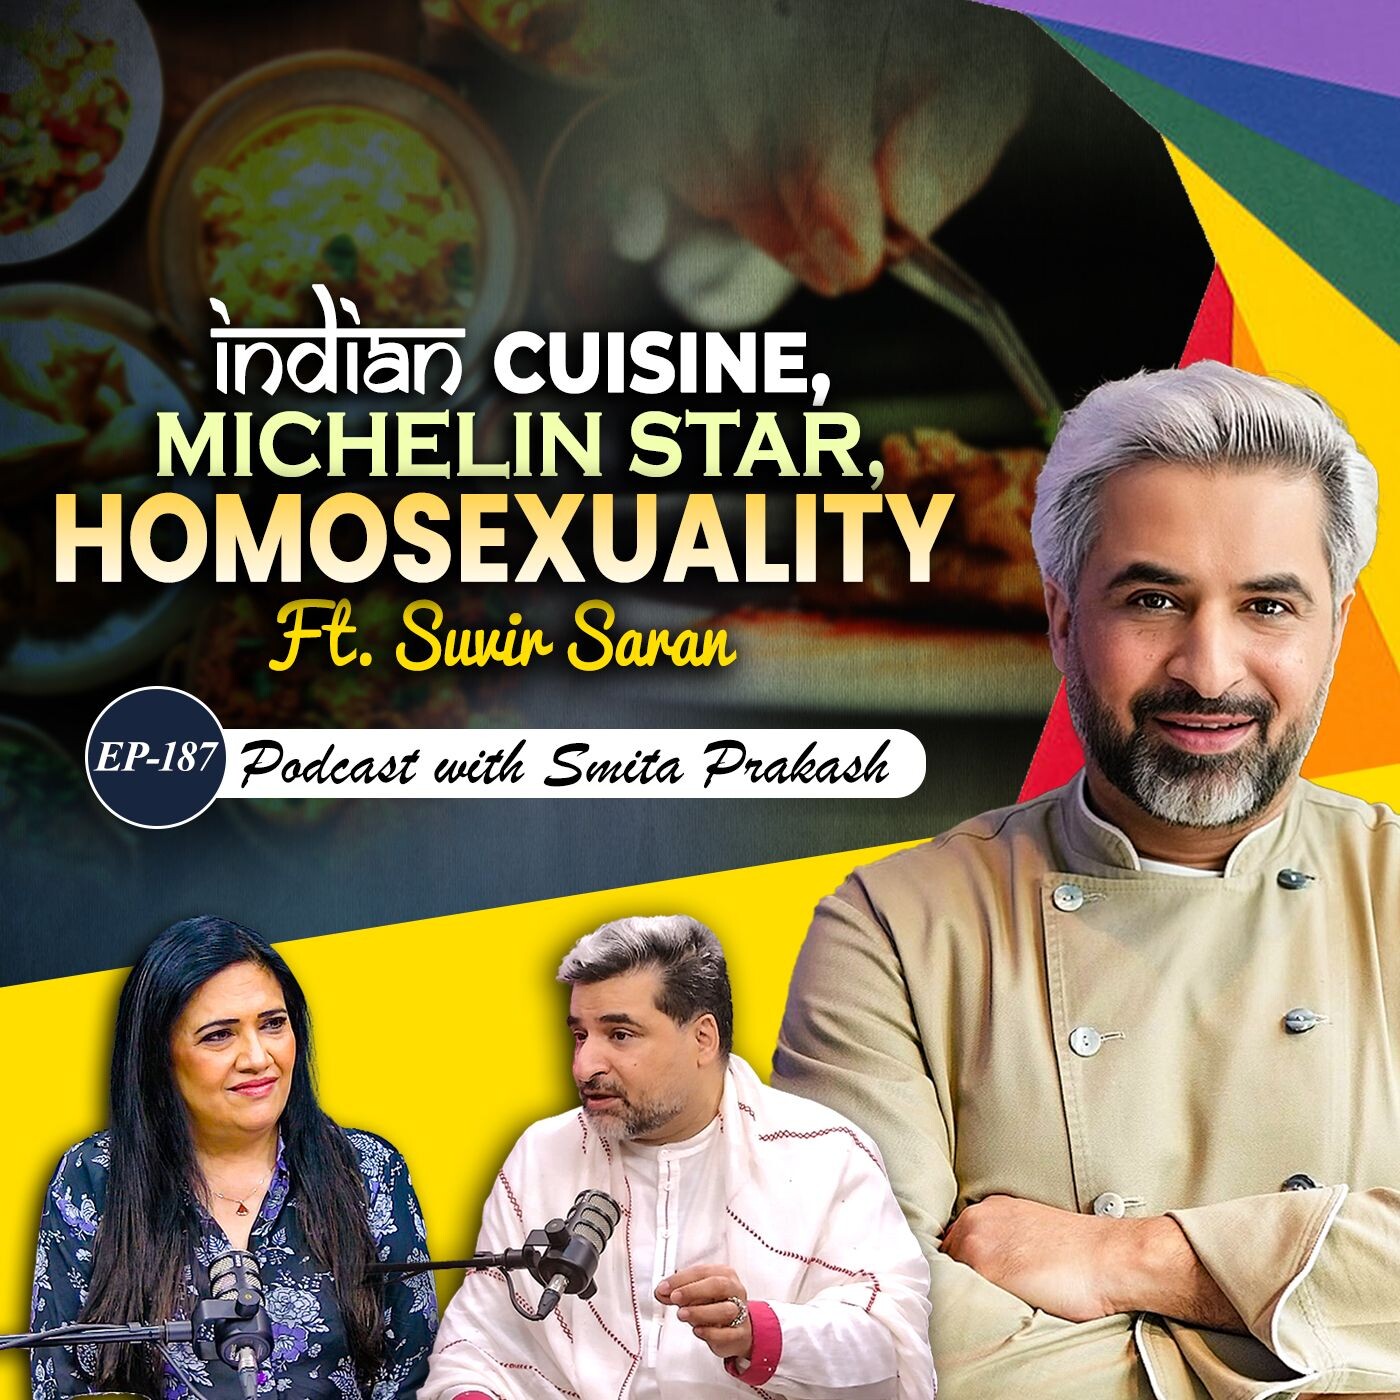 EP 187 - Indian Cuisine, Michelin Star, Healthy Cooking, and Homosexuality Ft. Chef Suvir Saran